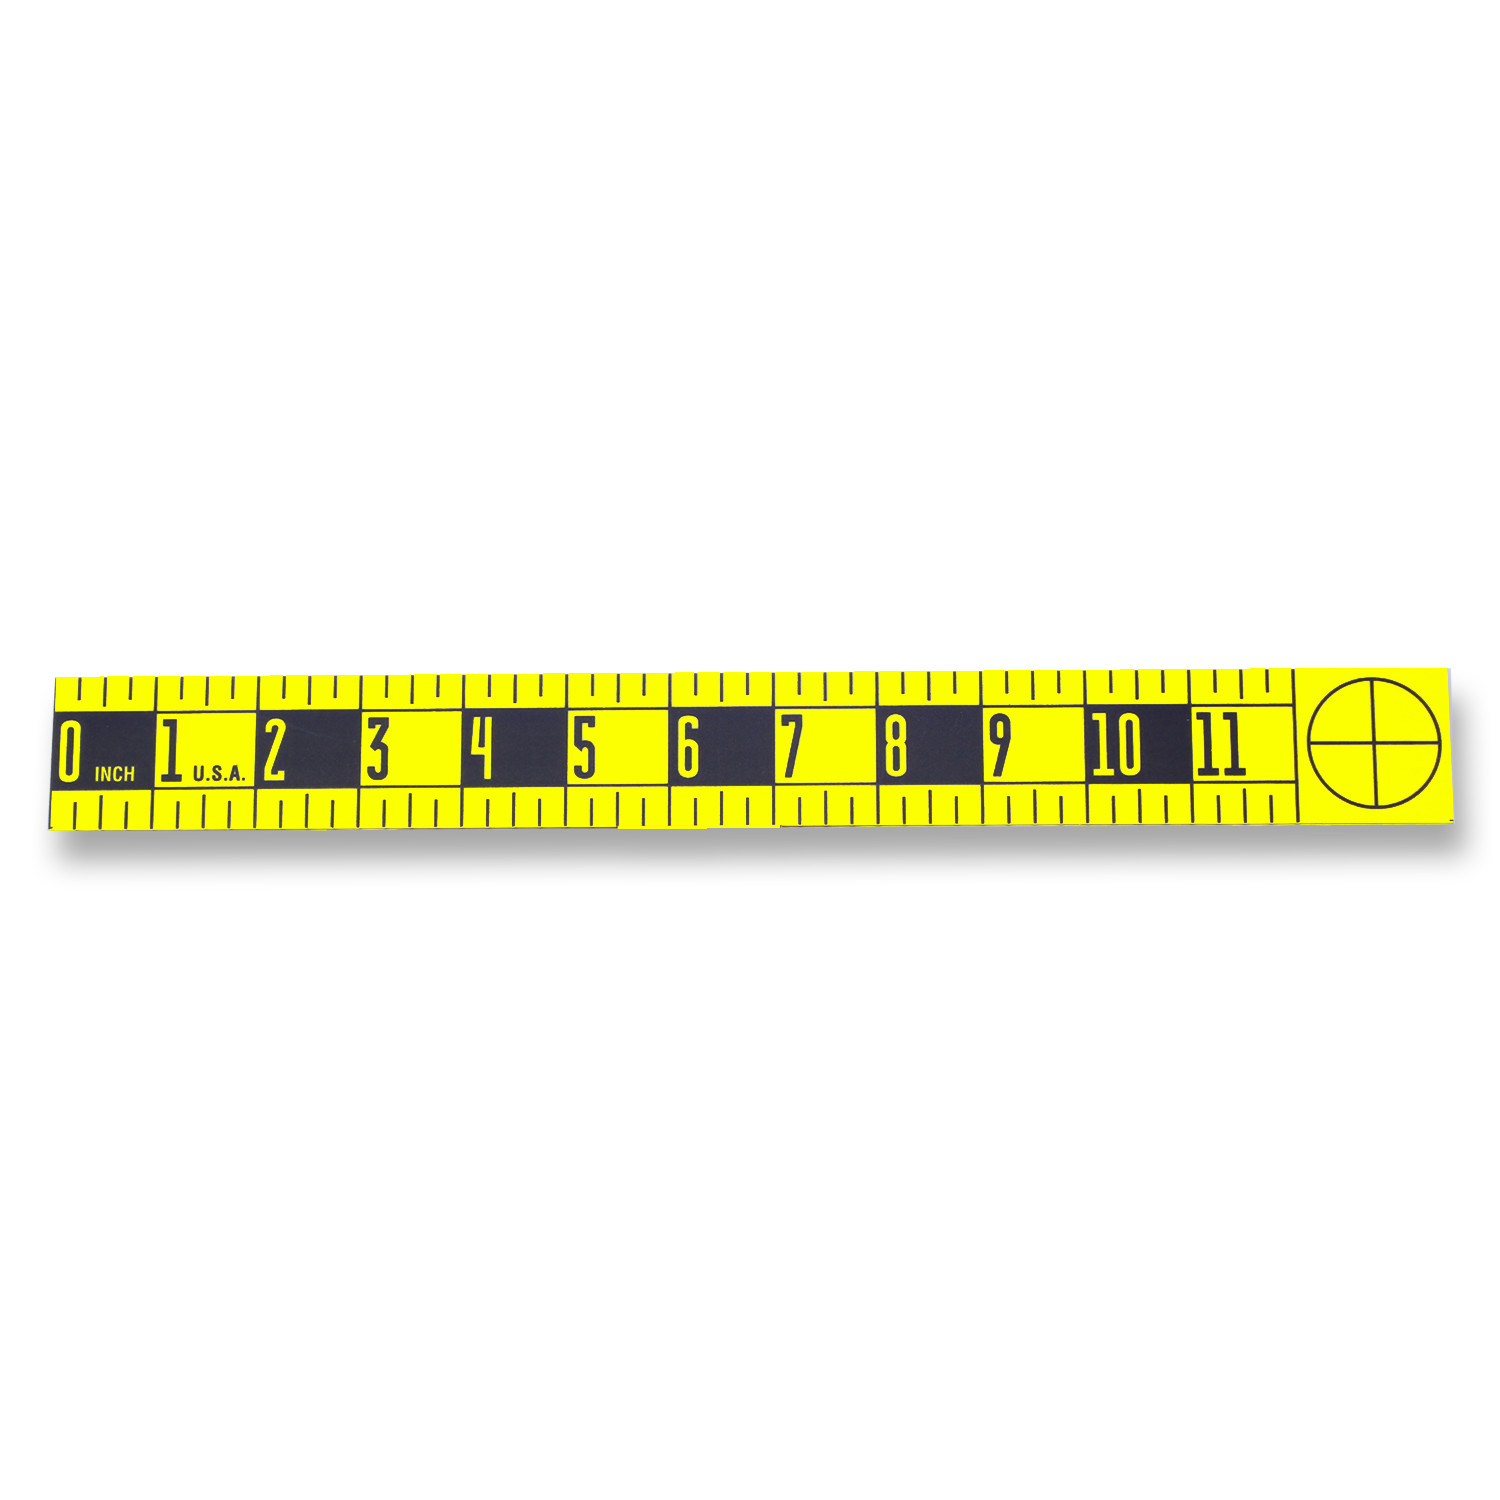 1″ Wide X 12″ Long Ruler Repeats 42 Times in a Roll – Oregon Rule Co.